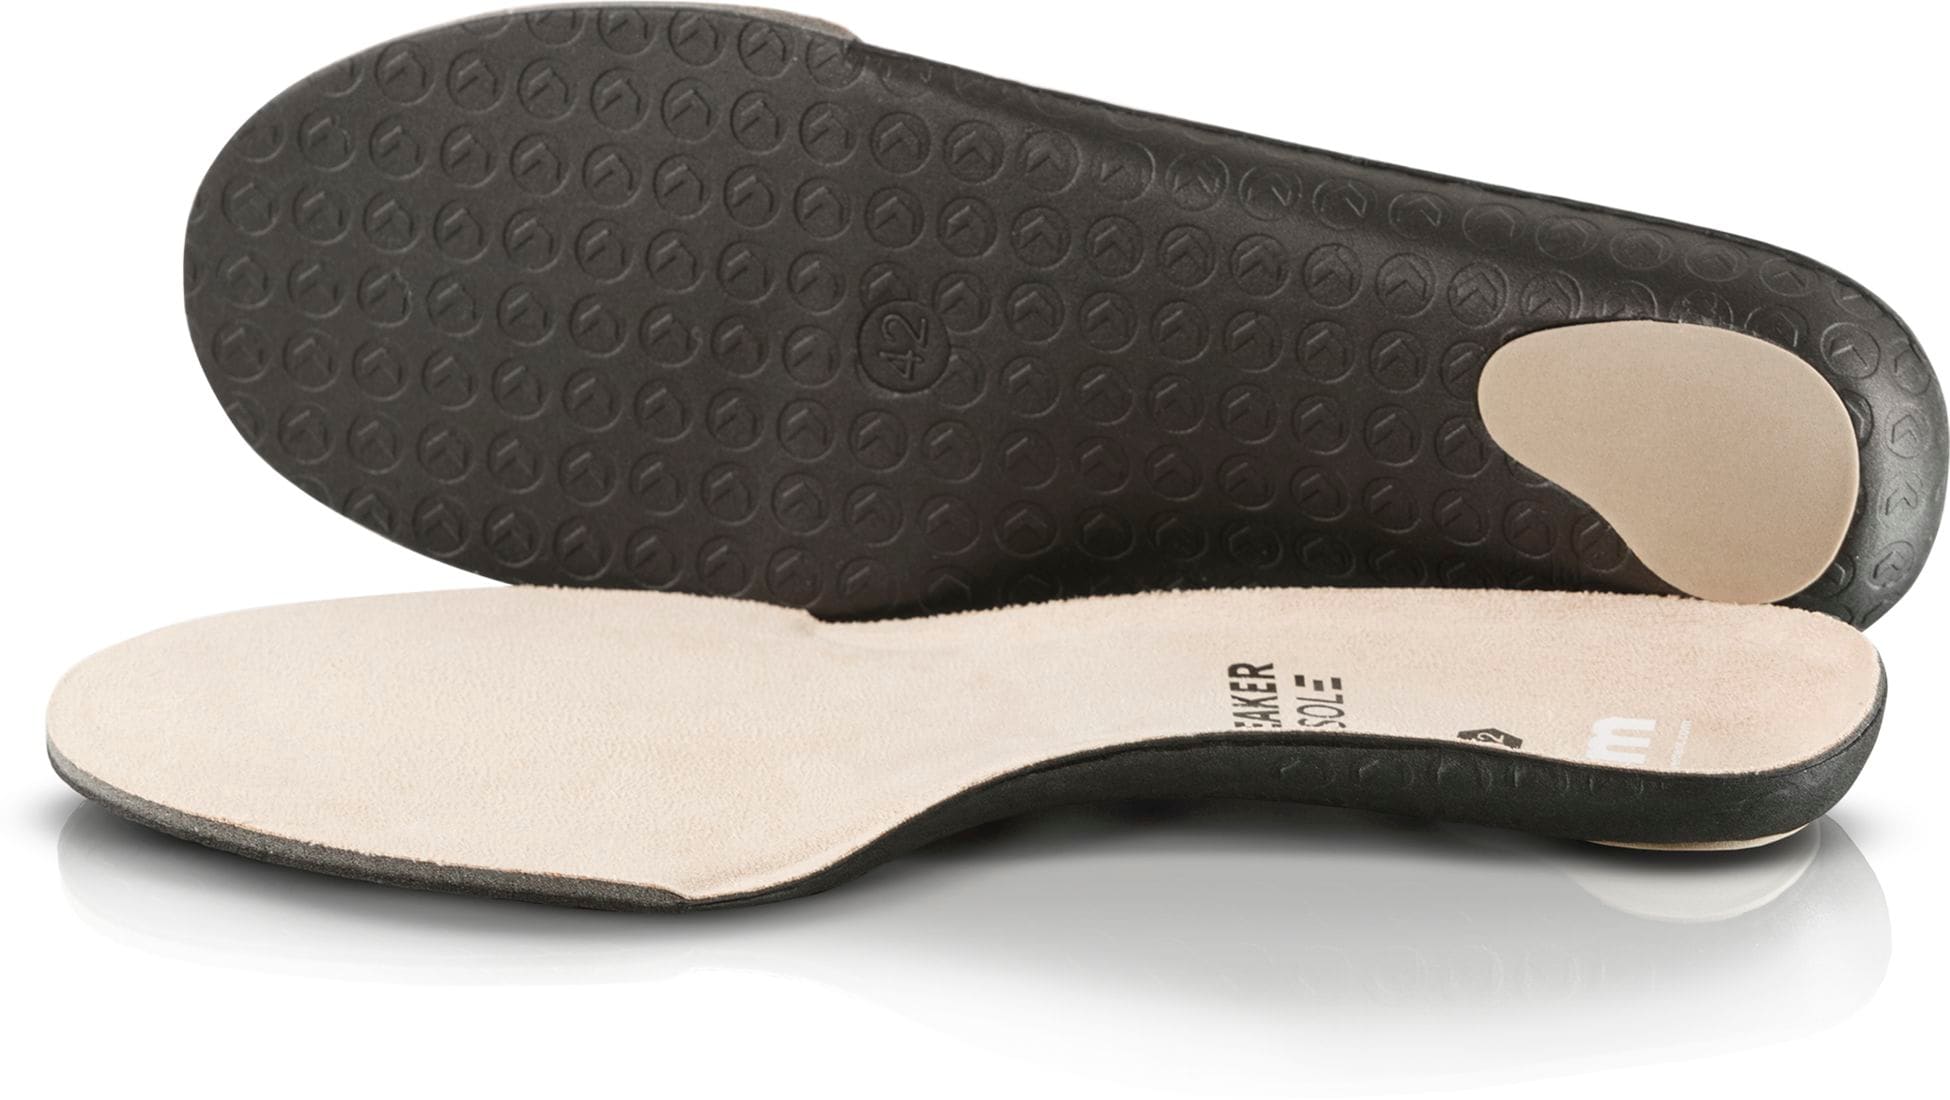 ORTHO MOVEMENT, SNEAKER INSOLE